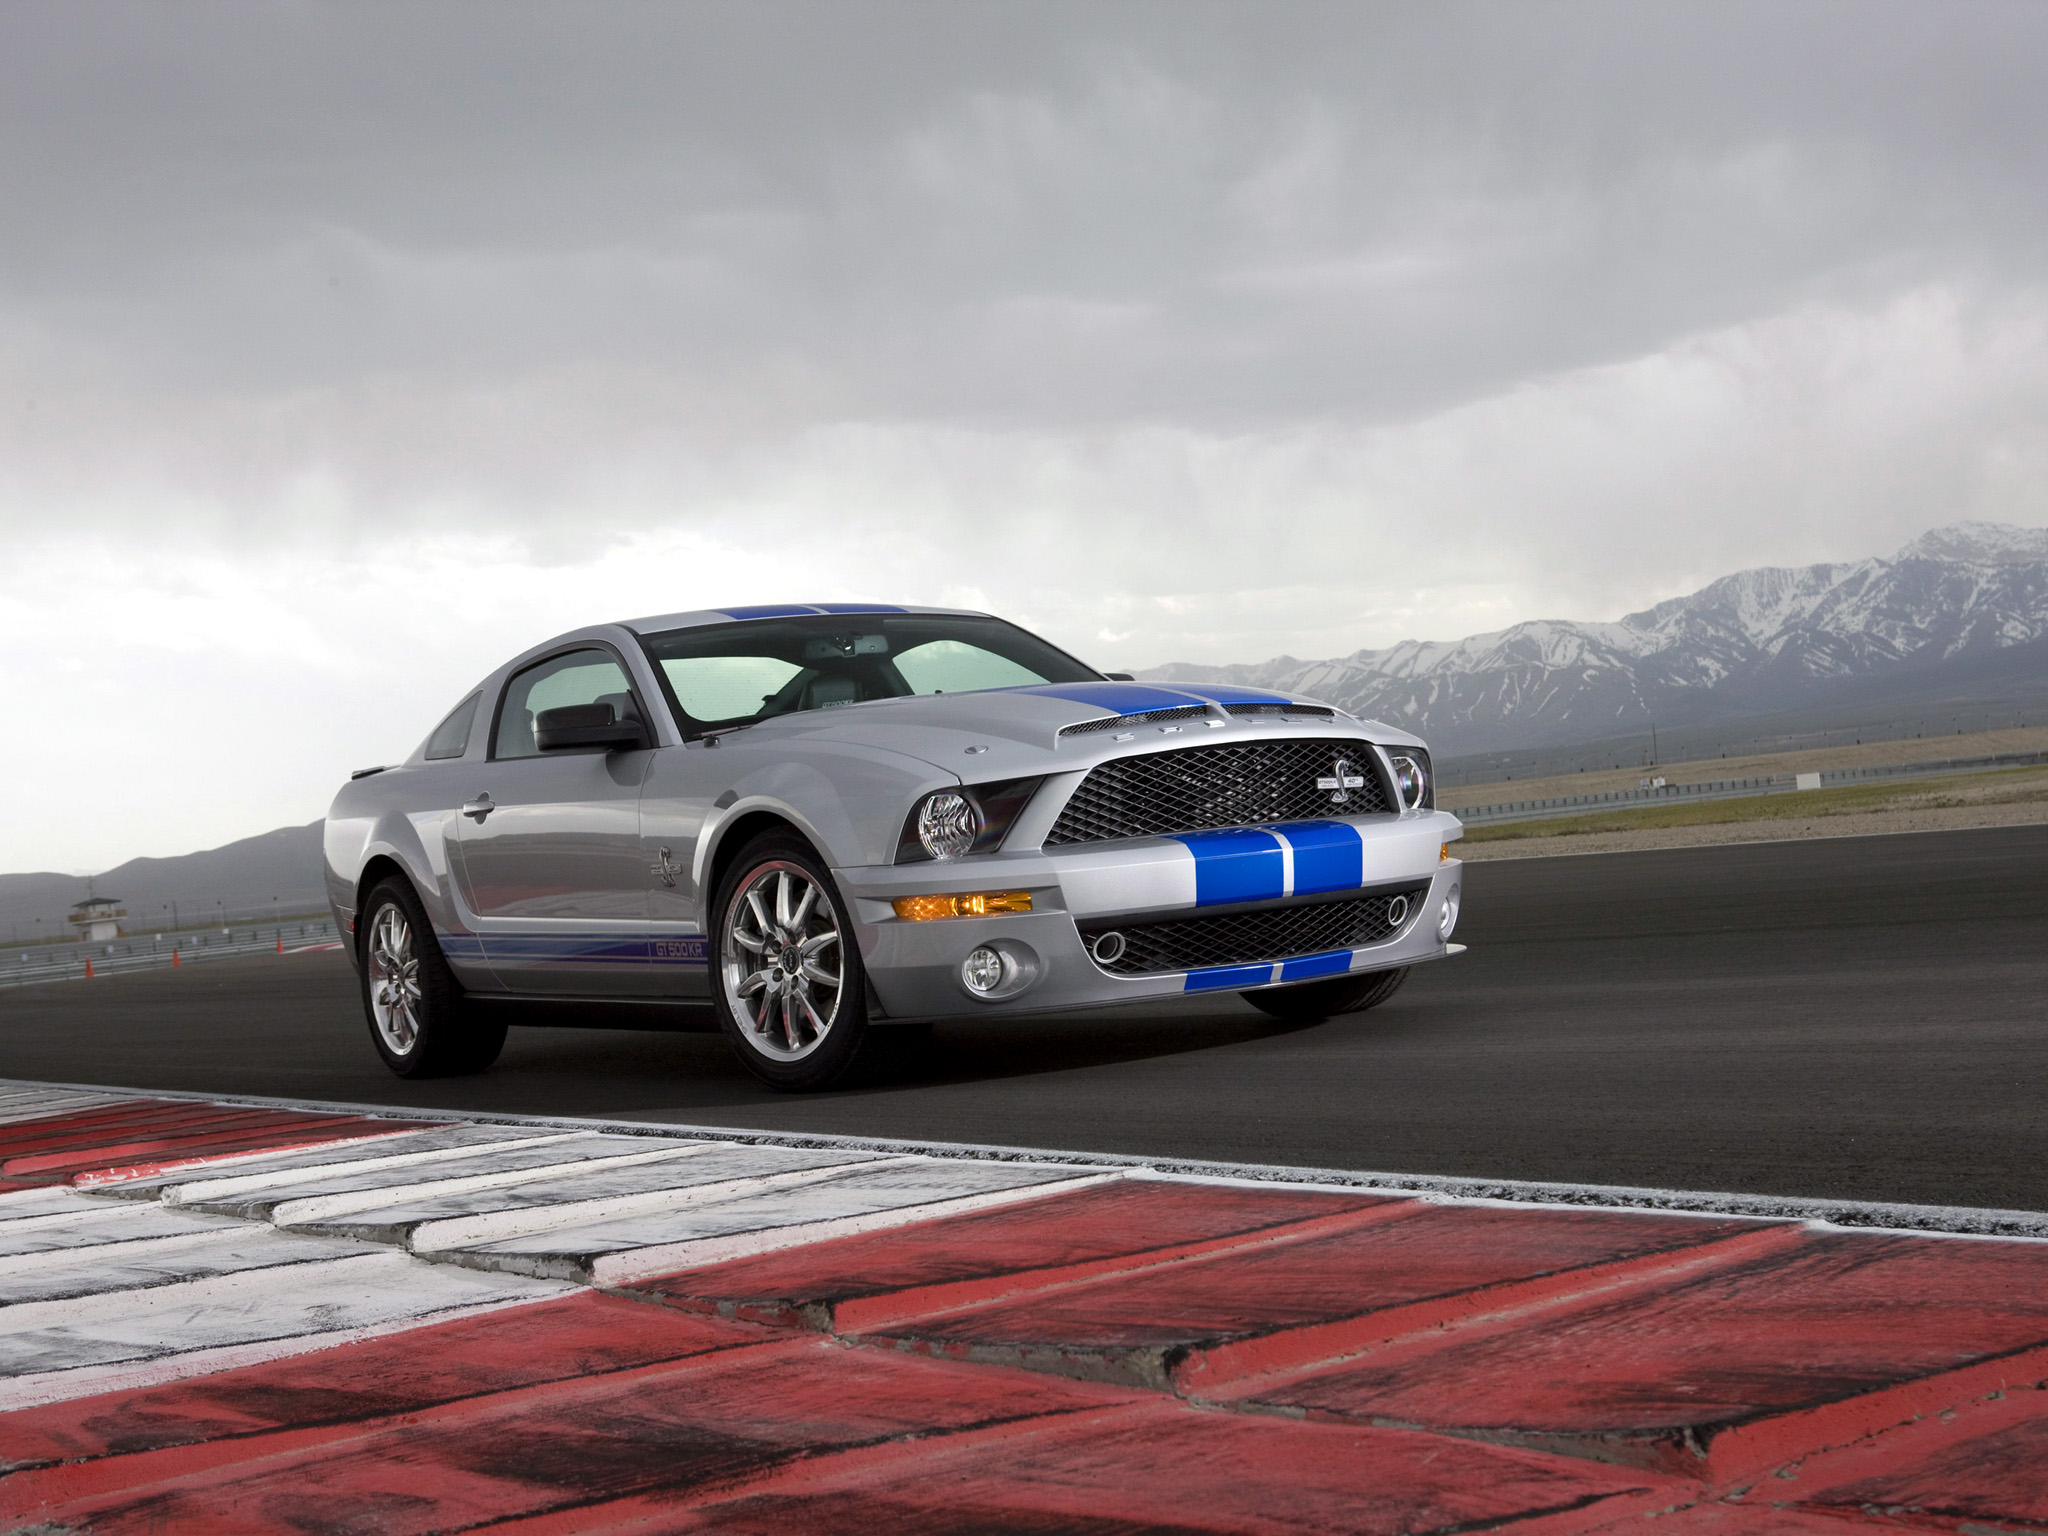 2008, Shelby, Gt500 kr, Gt500, Ford, Mustang, Muscle, Classic Wallpaper